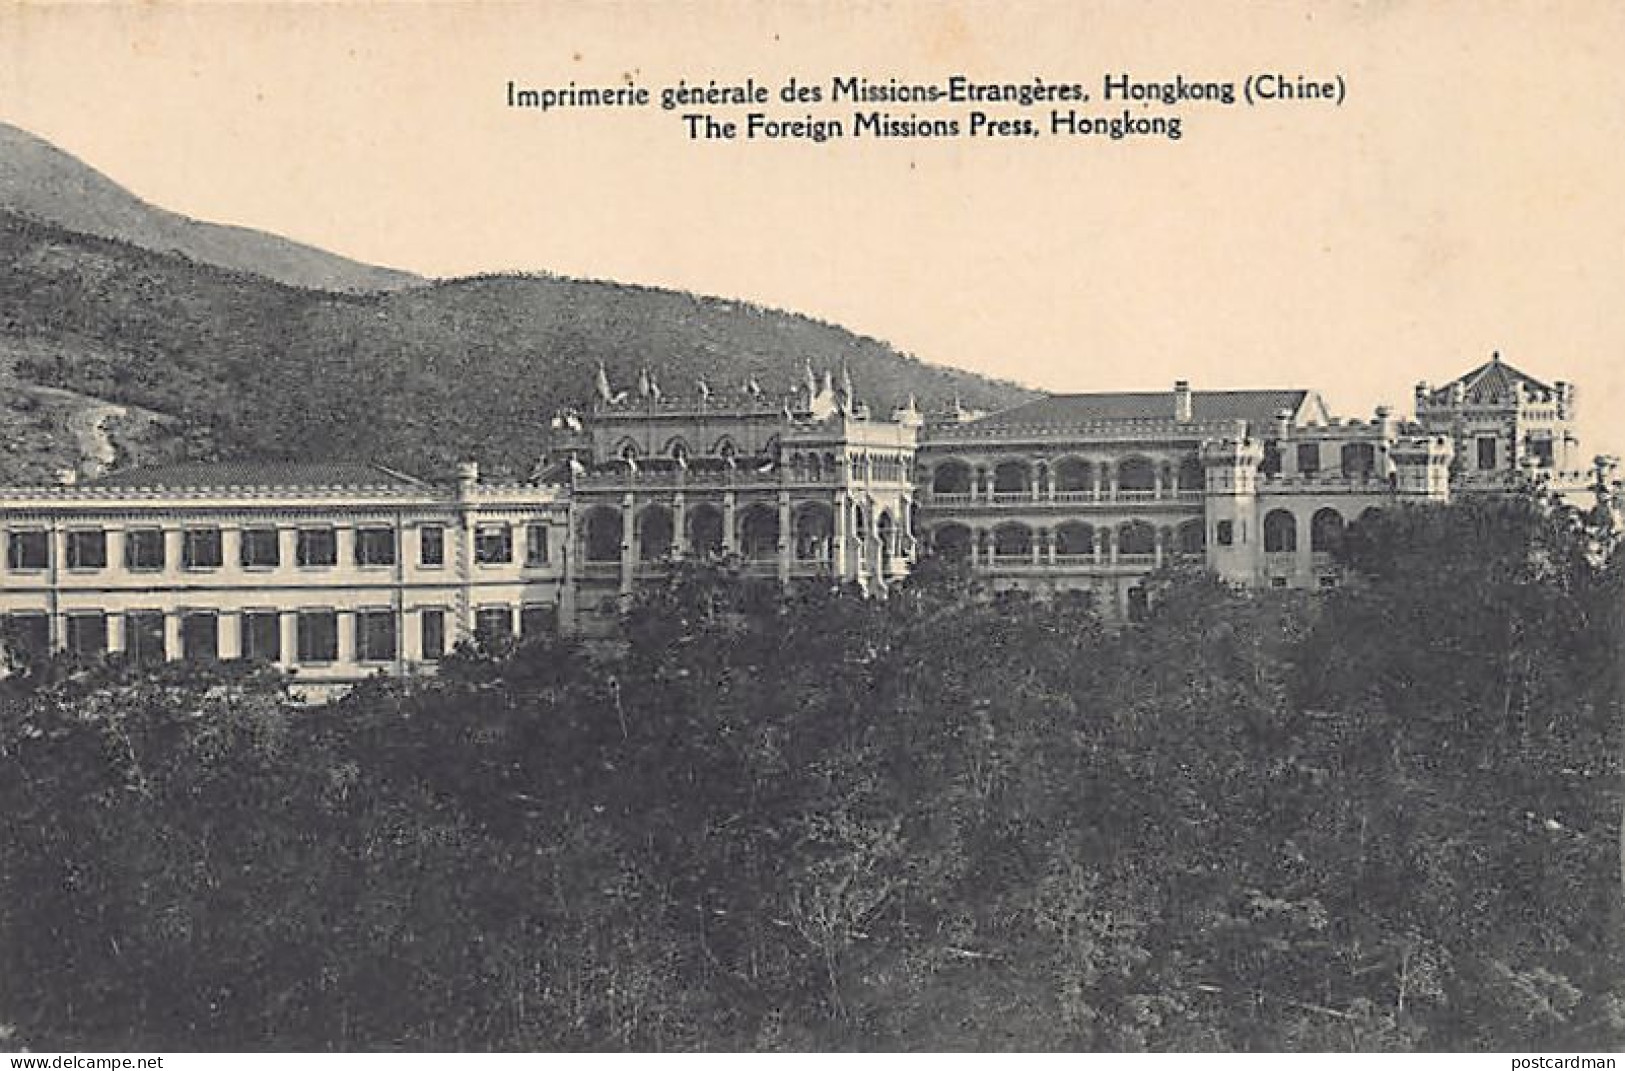 China - HONG KONG - The Printing Works Of The Foreign Missions Of Paris (France) - Publ. Missions Etrangères De Paris  - Cina (Hong Kong)